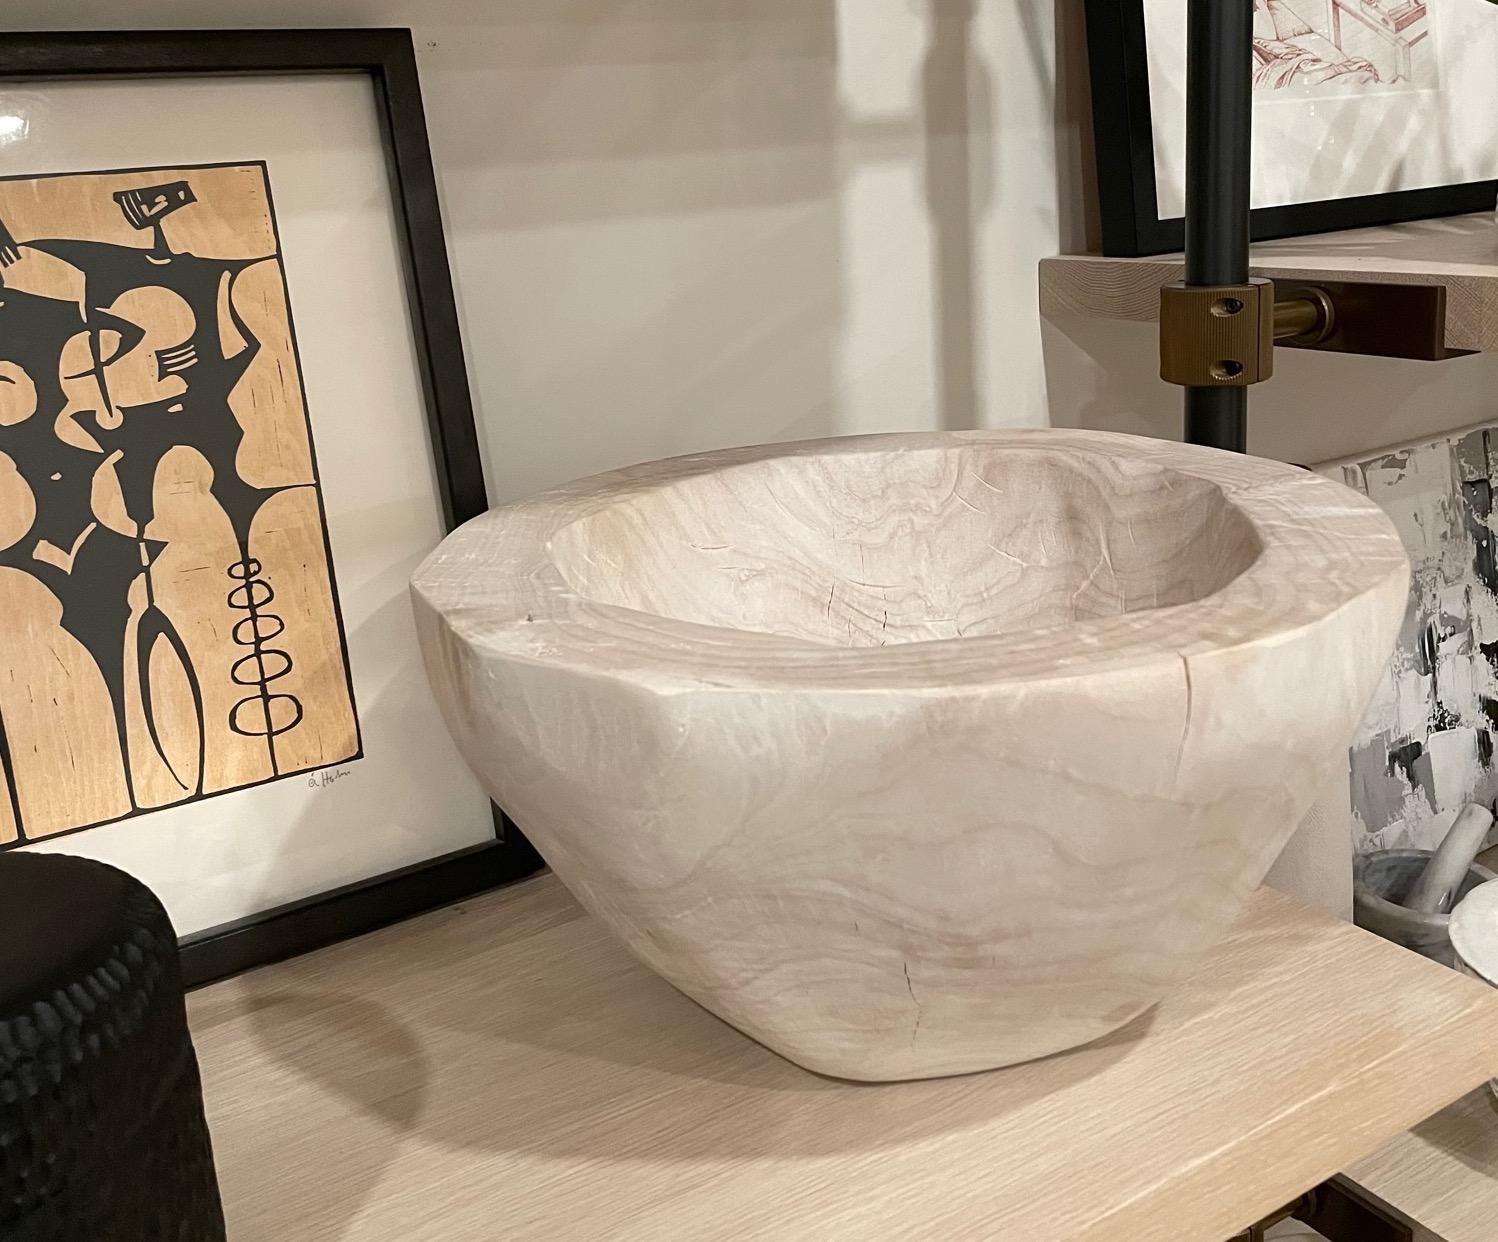 A large sun bleached reclaimed wood bowl. This beautiful hand-carved wood bowl shows off its natural characteristics in a very organic way. The inclusions and cracks are inherent to the reclaimed wood and add beauty to this lovely decorative modern